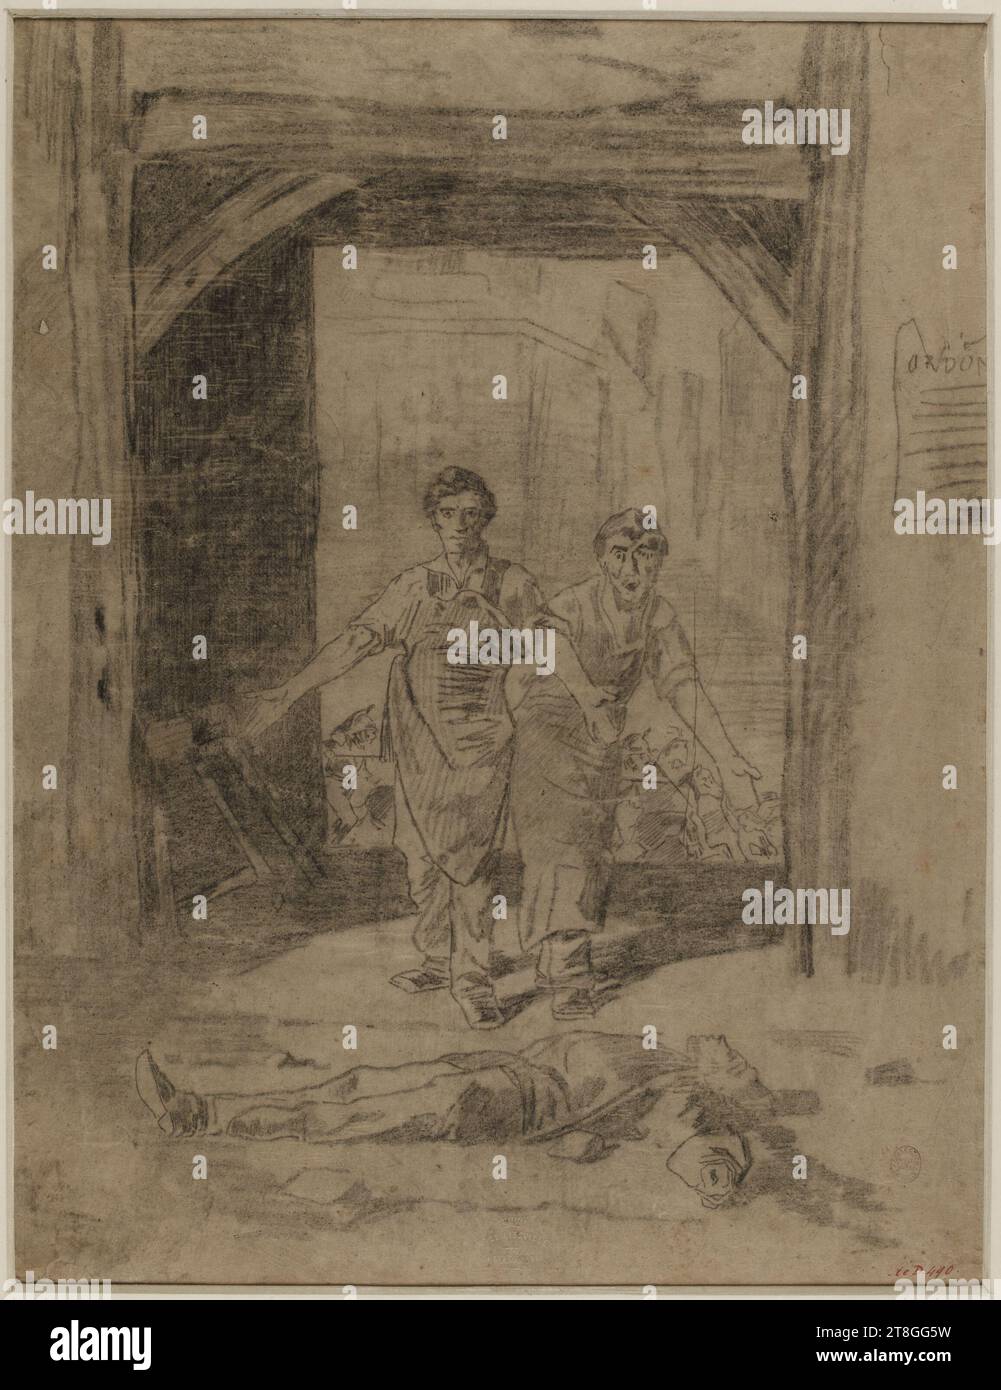 Scene from the July Revolution of 1830. Two typographers in front of a victim, Anonyme, Dessinateur, En 1830, 19e siècle, Dessin, Arts graphiques, Dessin, Dimensions - Work: Height: 41.5 cm, Width: 54.5 cm Stock Photo